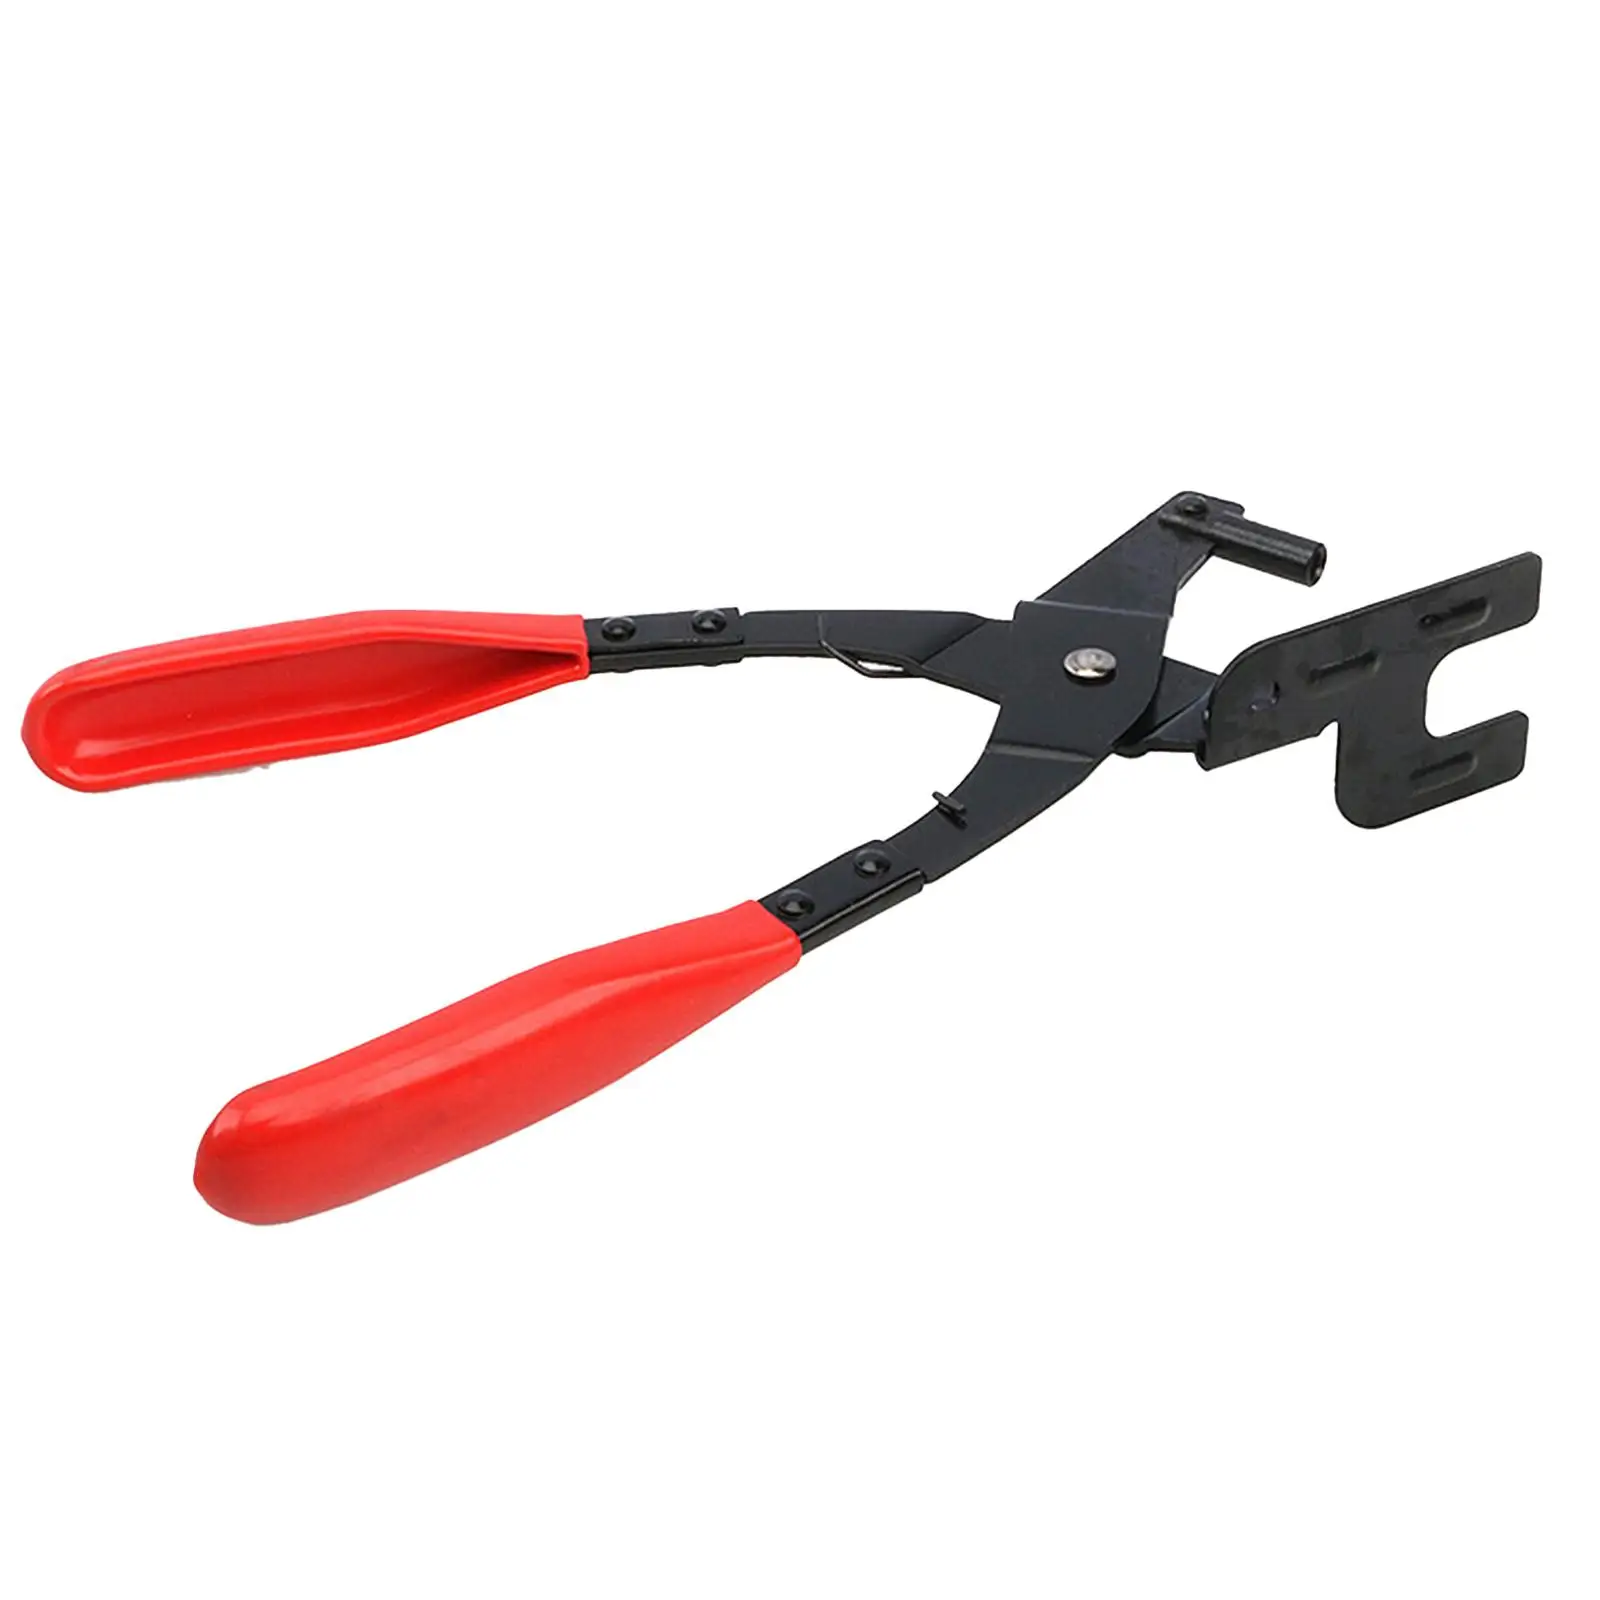 Car Exhaust Hanger Removal Pliers Hand Tools 25 Degree Offset Handles Exhaust Hanger Removal Tool for Tailpipes, Mufflers Red